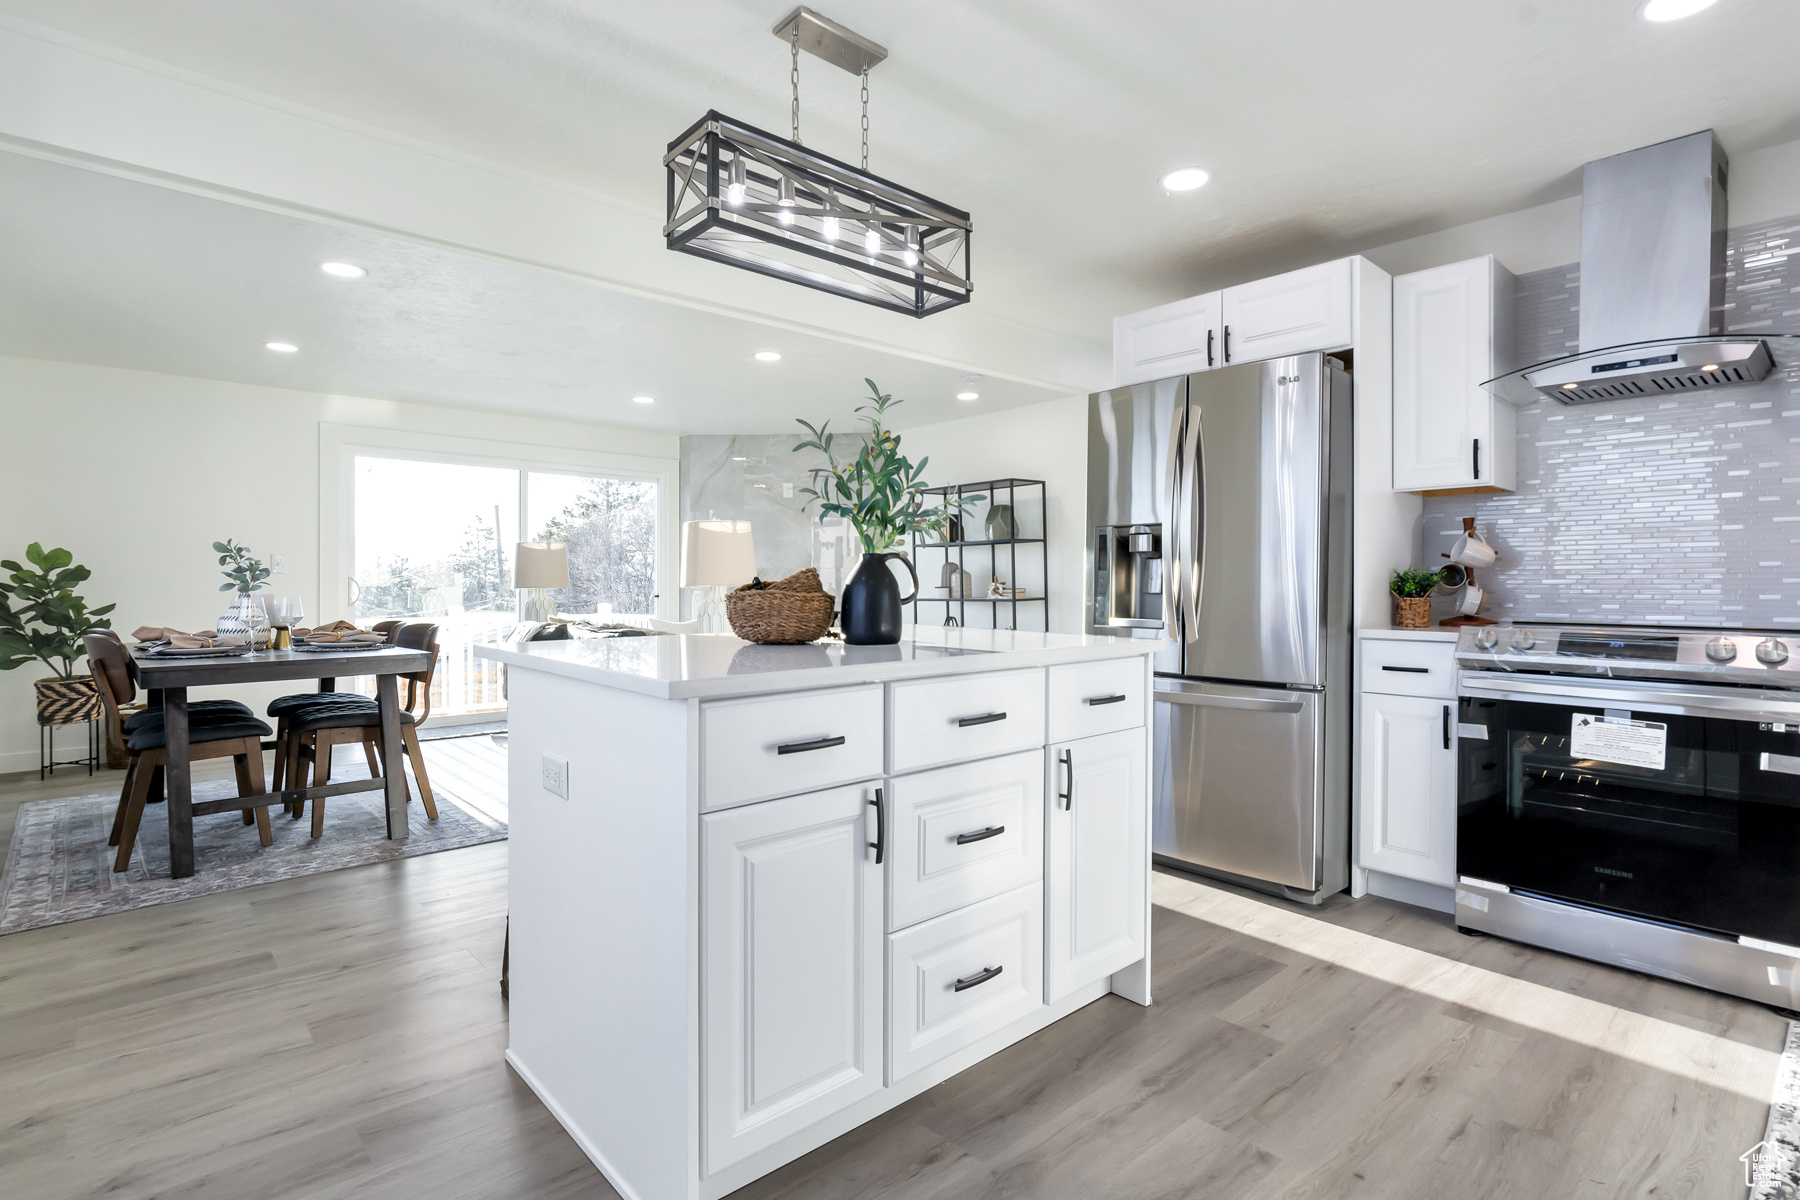 Kitchen featuring decorative light fixtures, wall chimney exhaust hood, backsplash, appliances with stainless steel finishes, and light hardwood / wood-style flooring